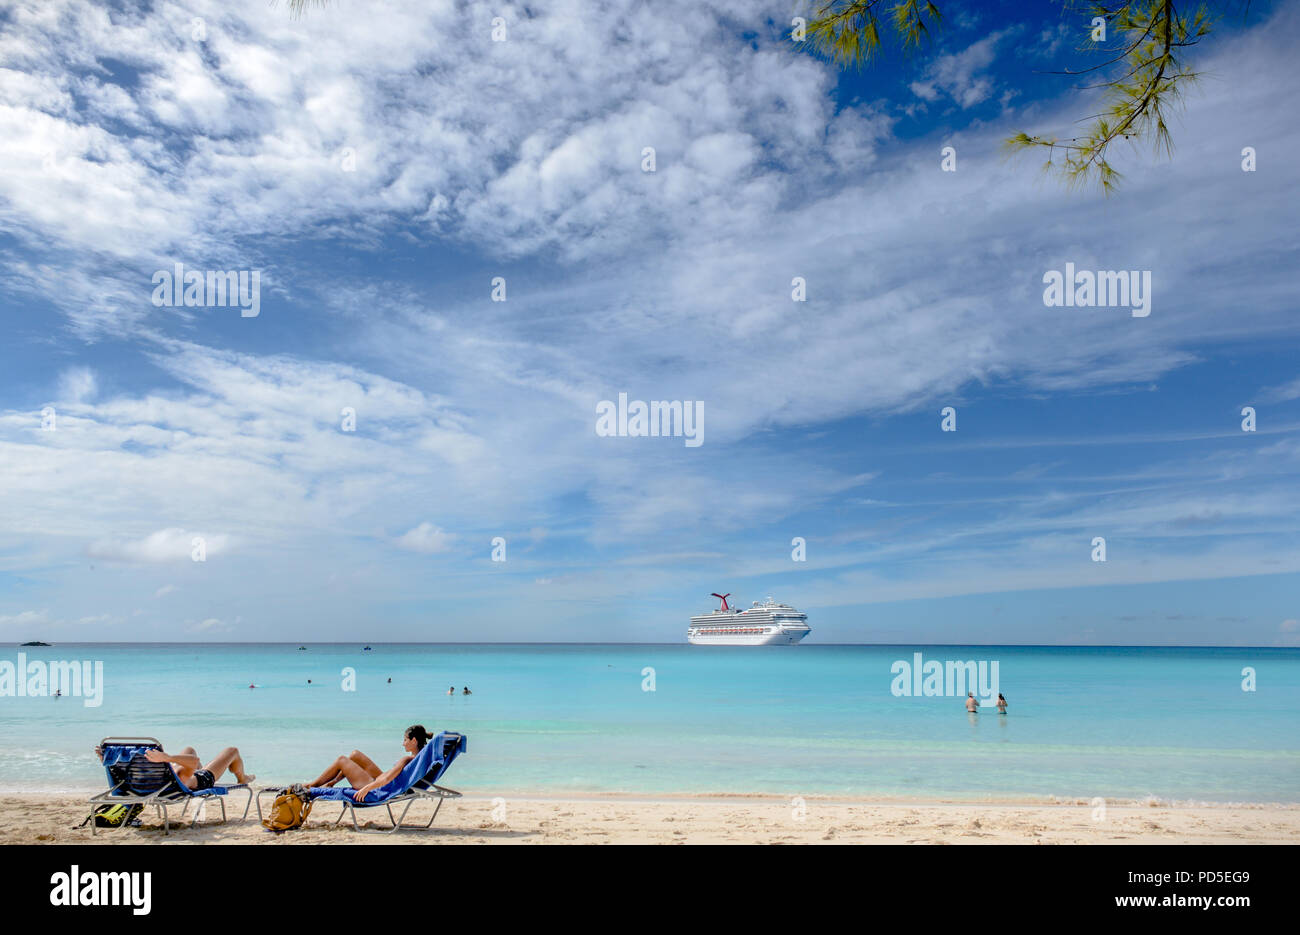 Couple relaxing in the beach chairs with ship on the back on Caribbean island of Half Moon Cay Stock Photo